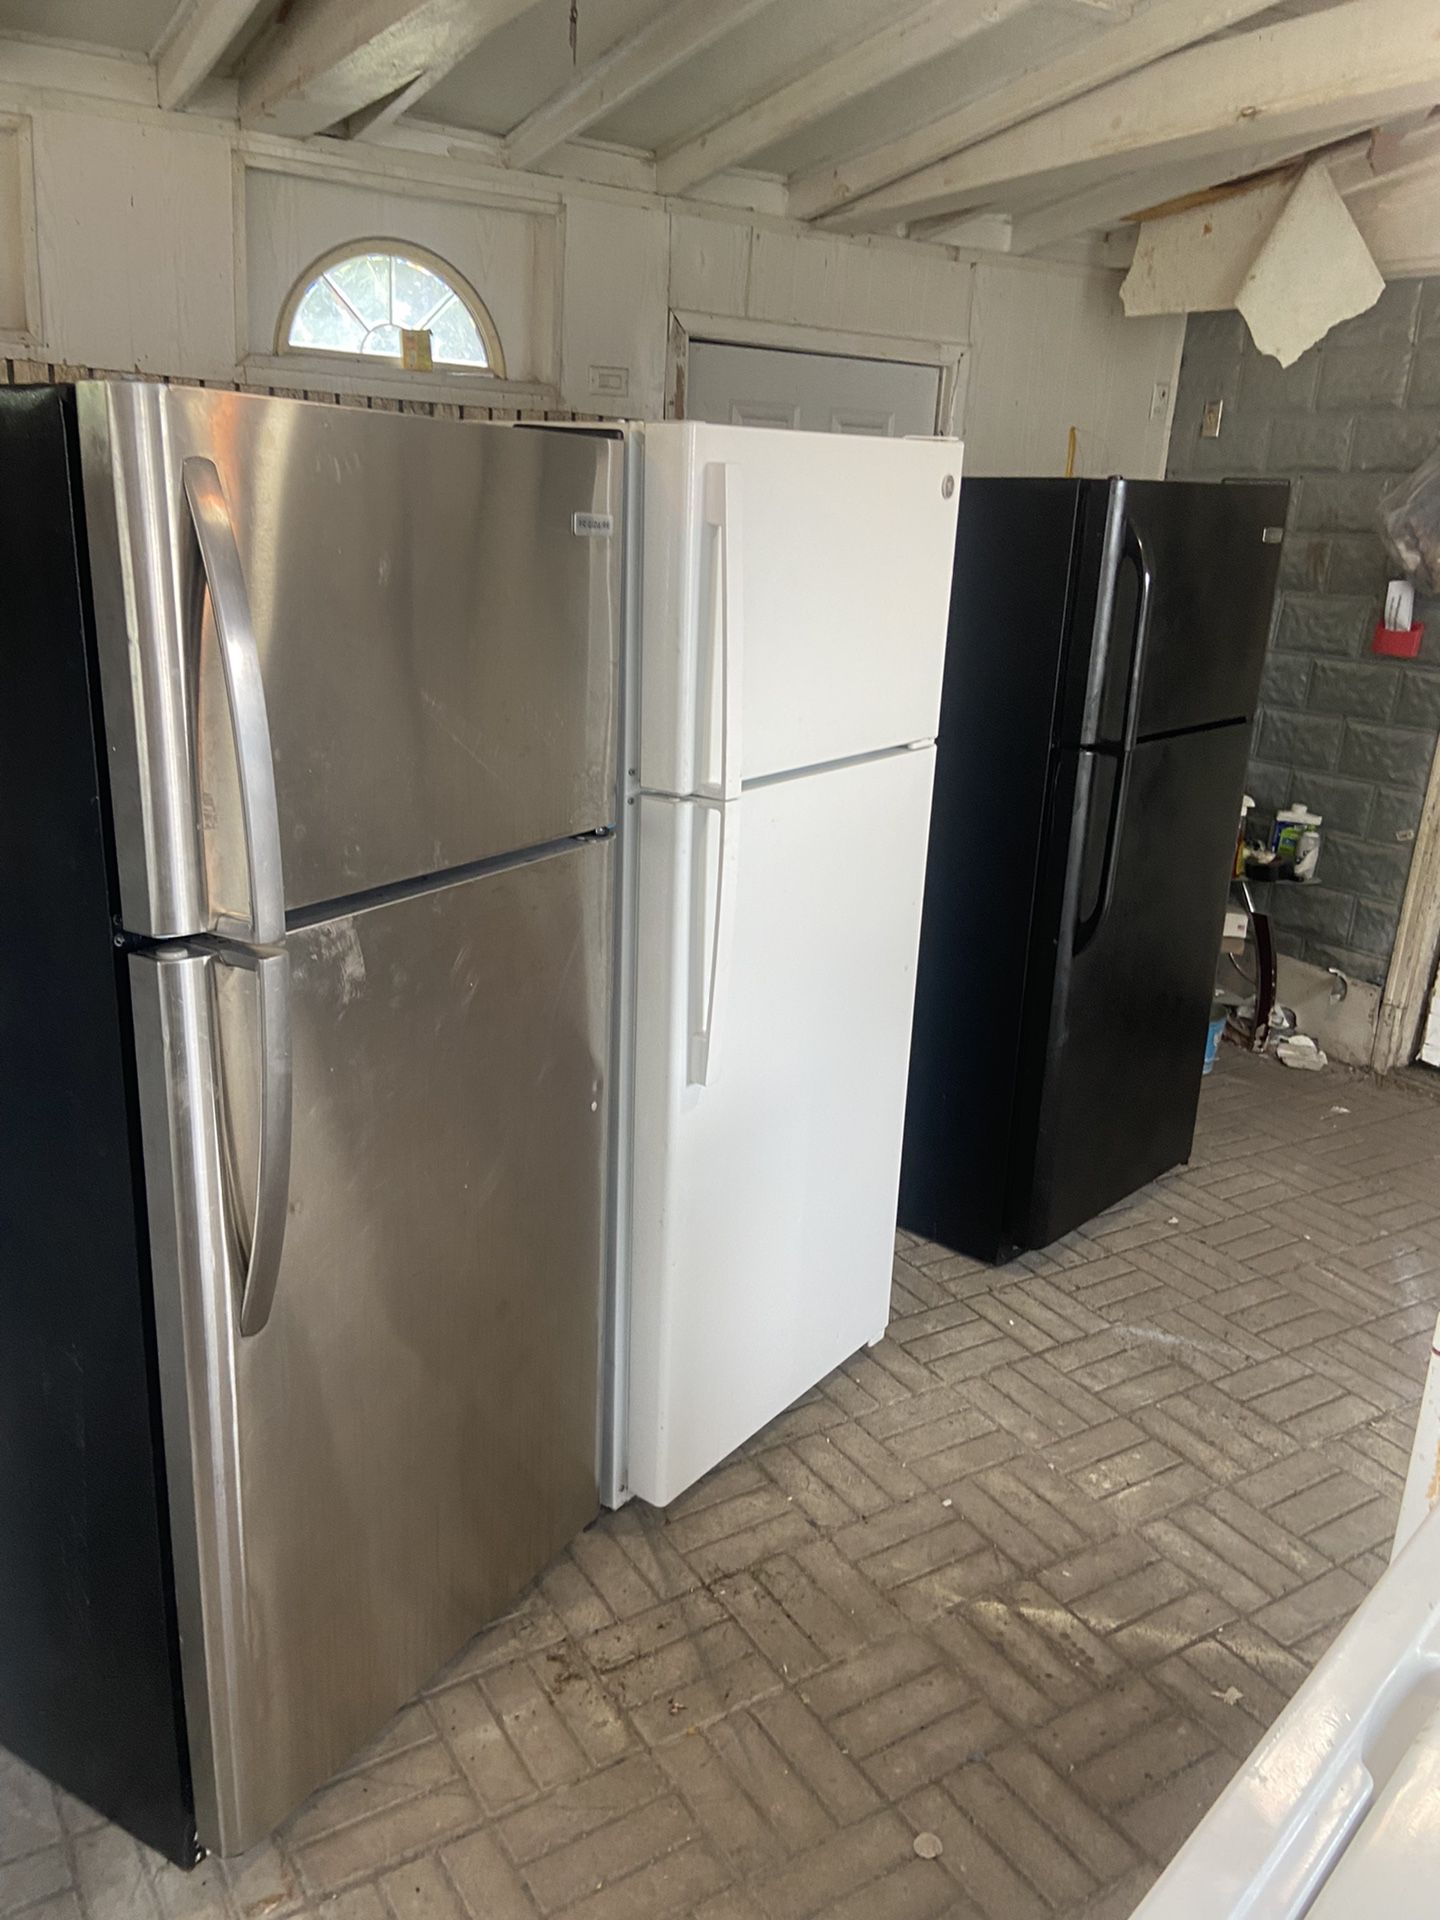 EXCELLENT  RUNNING  FRIDGES  SOLD SEPARATELY. PRICES START OUT AT $275 & UP.  ALL RUN LIKE NEW ! 18 Cu ft. ONES. THEY BEEN CLEANED IN & OUT. ALSO HAVE